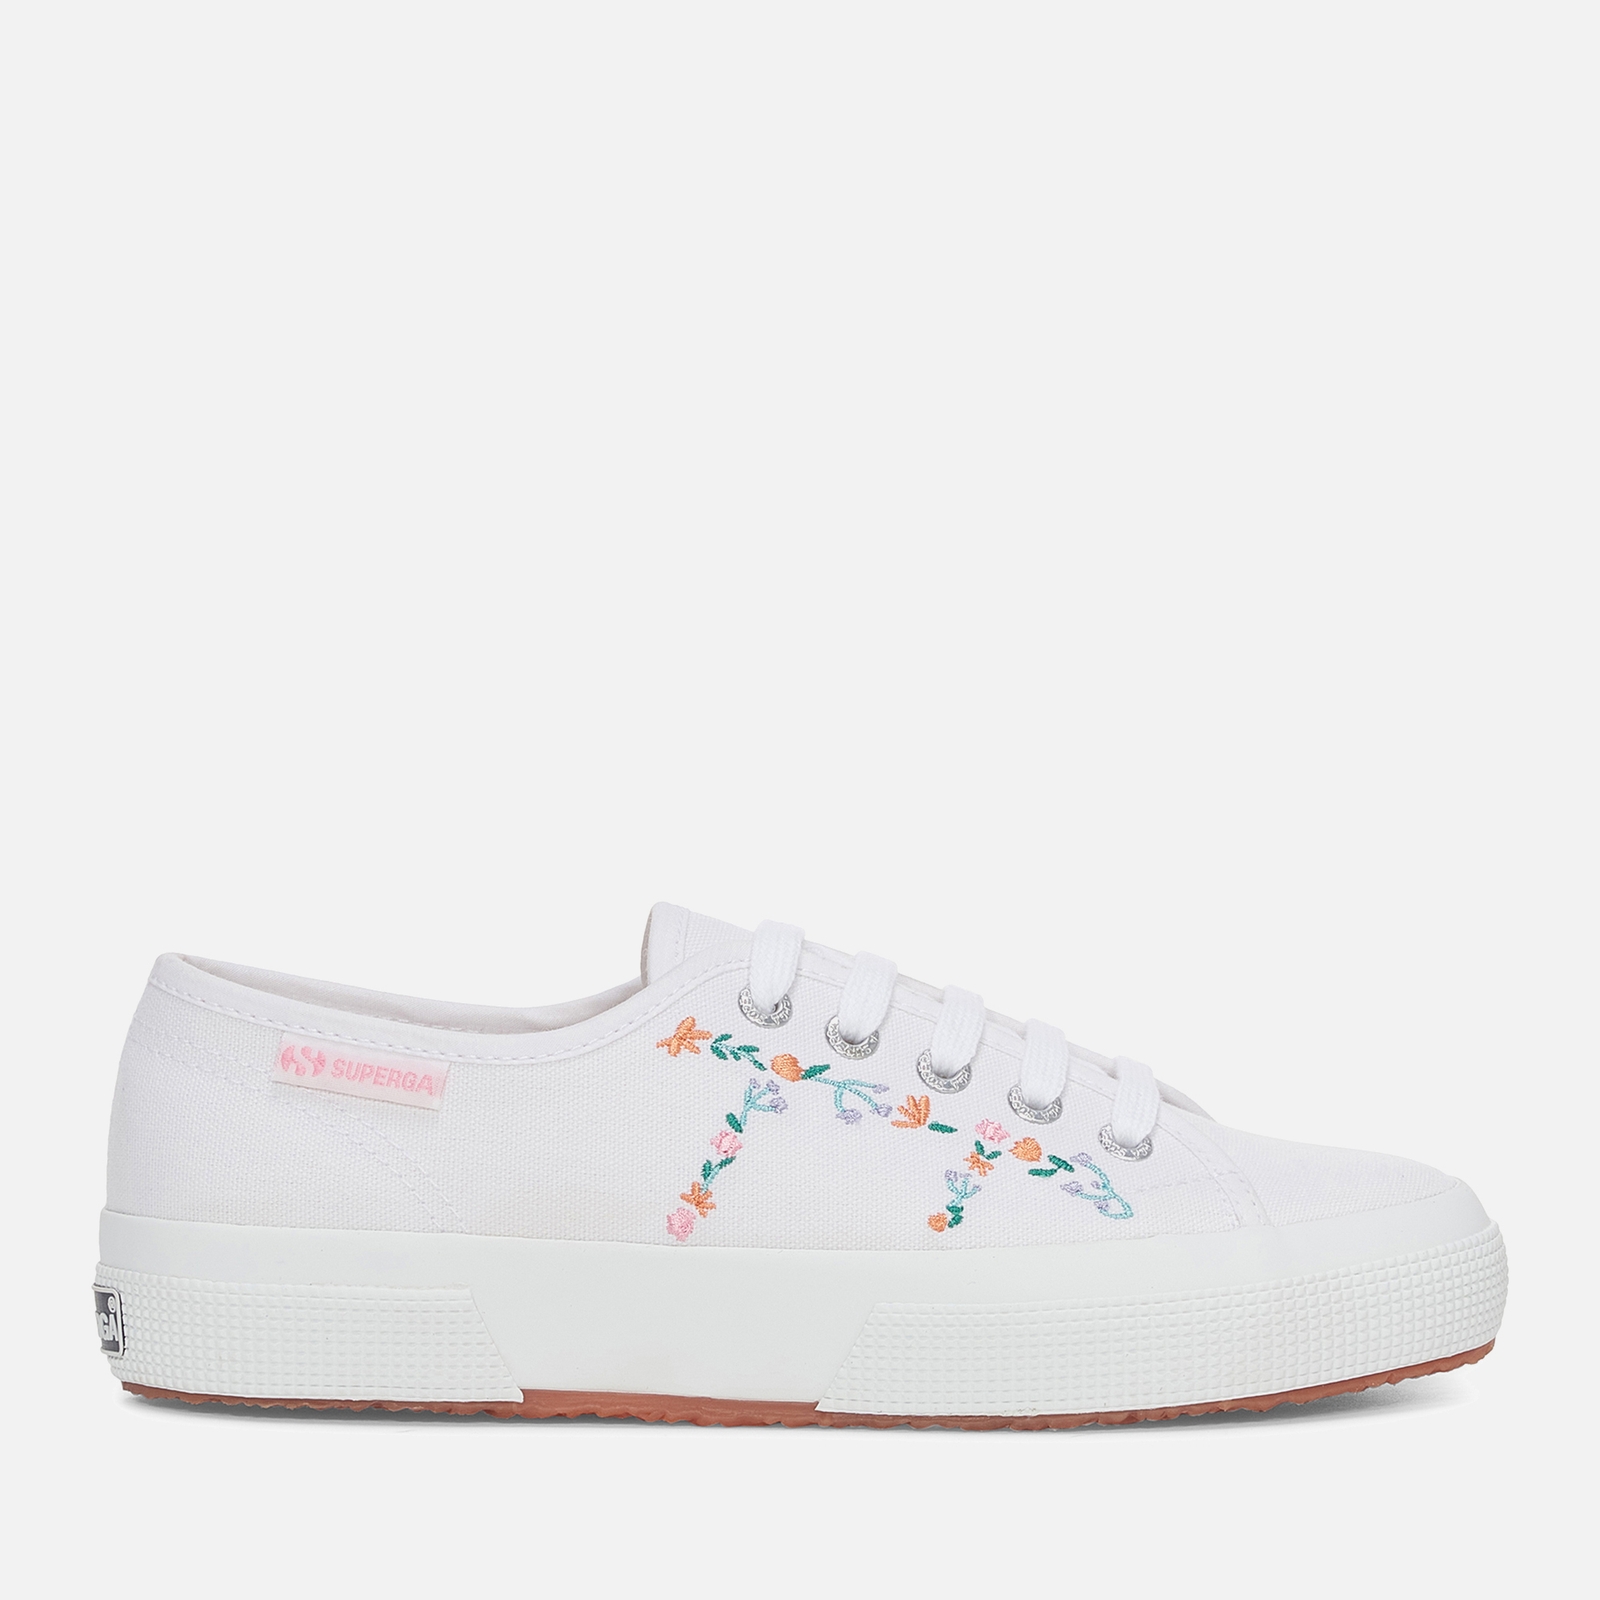 Superga Women's 2750 Little Flowers Embroidery Trainers - White